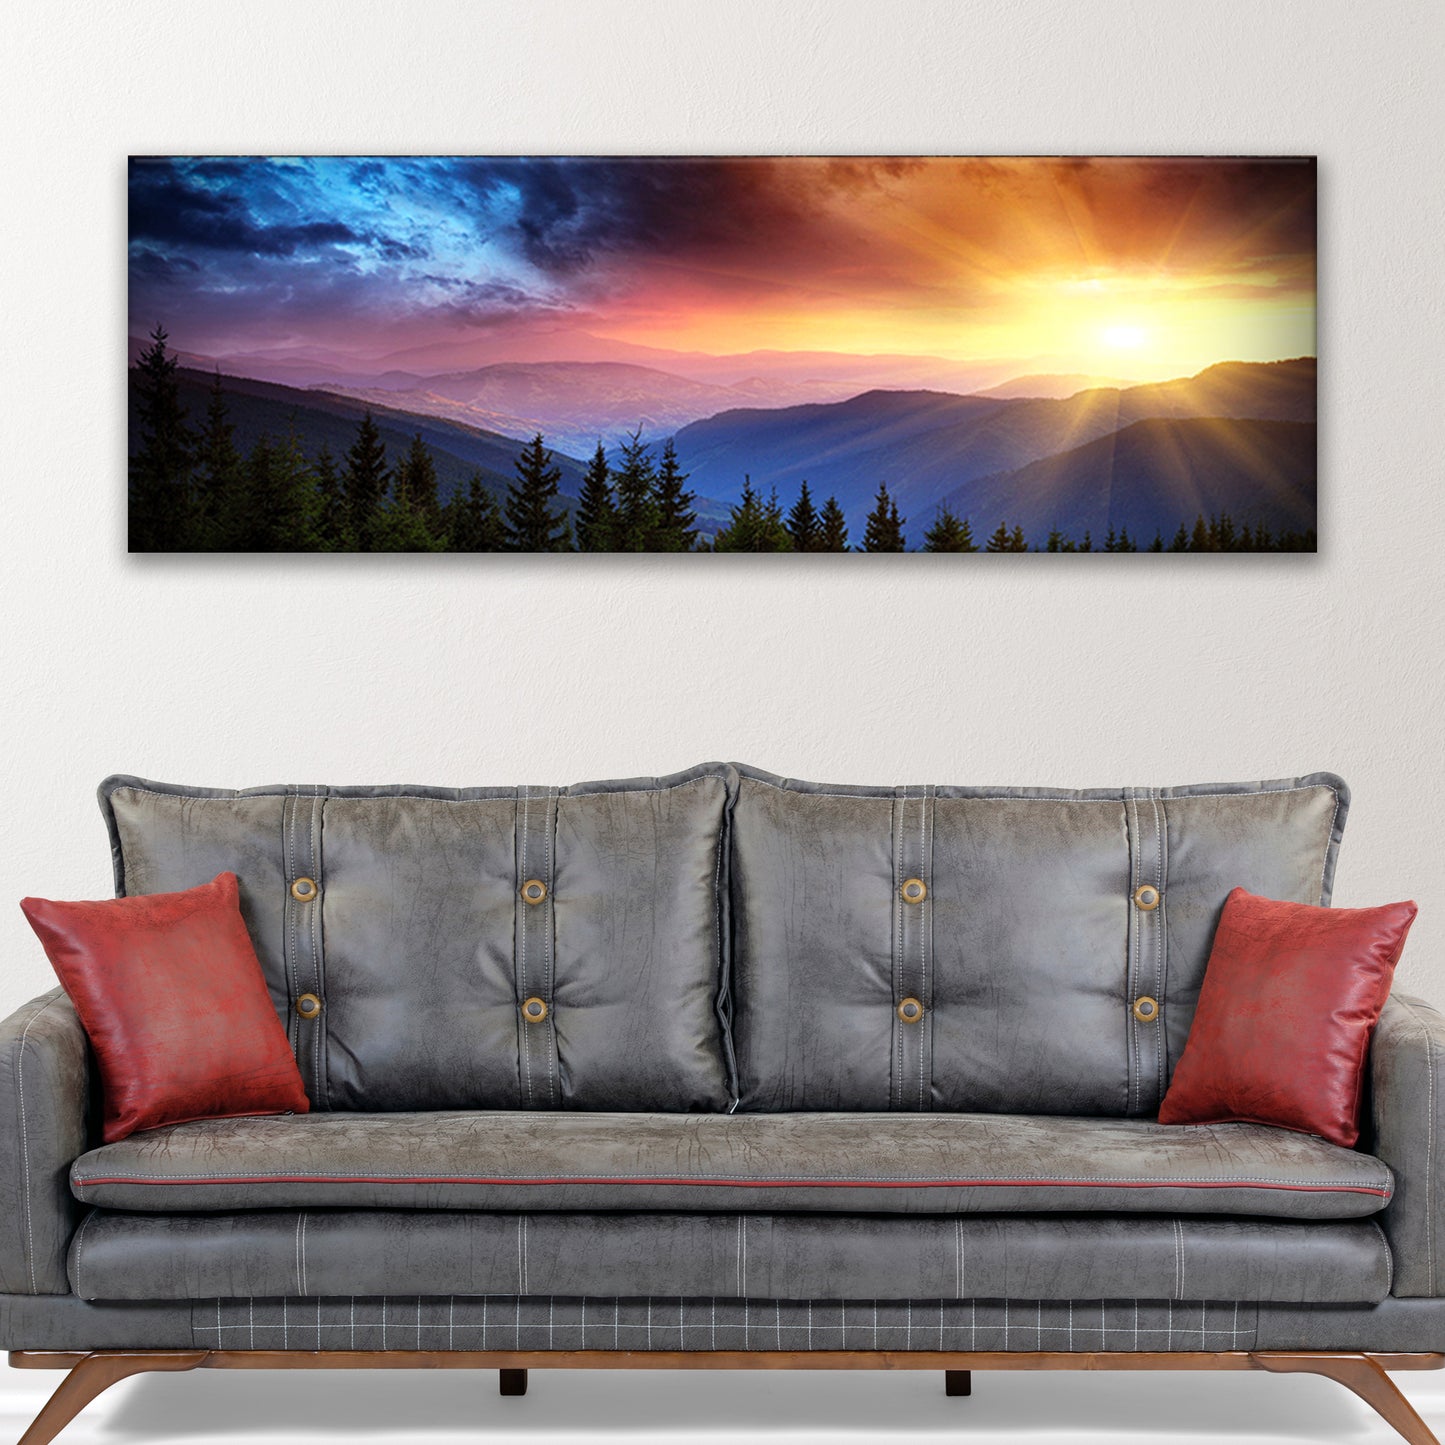 Purple And Sunrise Canvas Wall Art - Image by Tailored Canvases